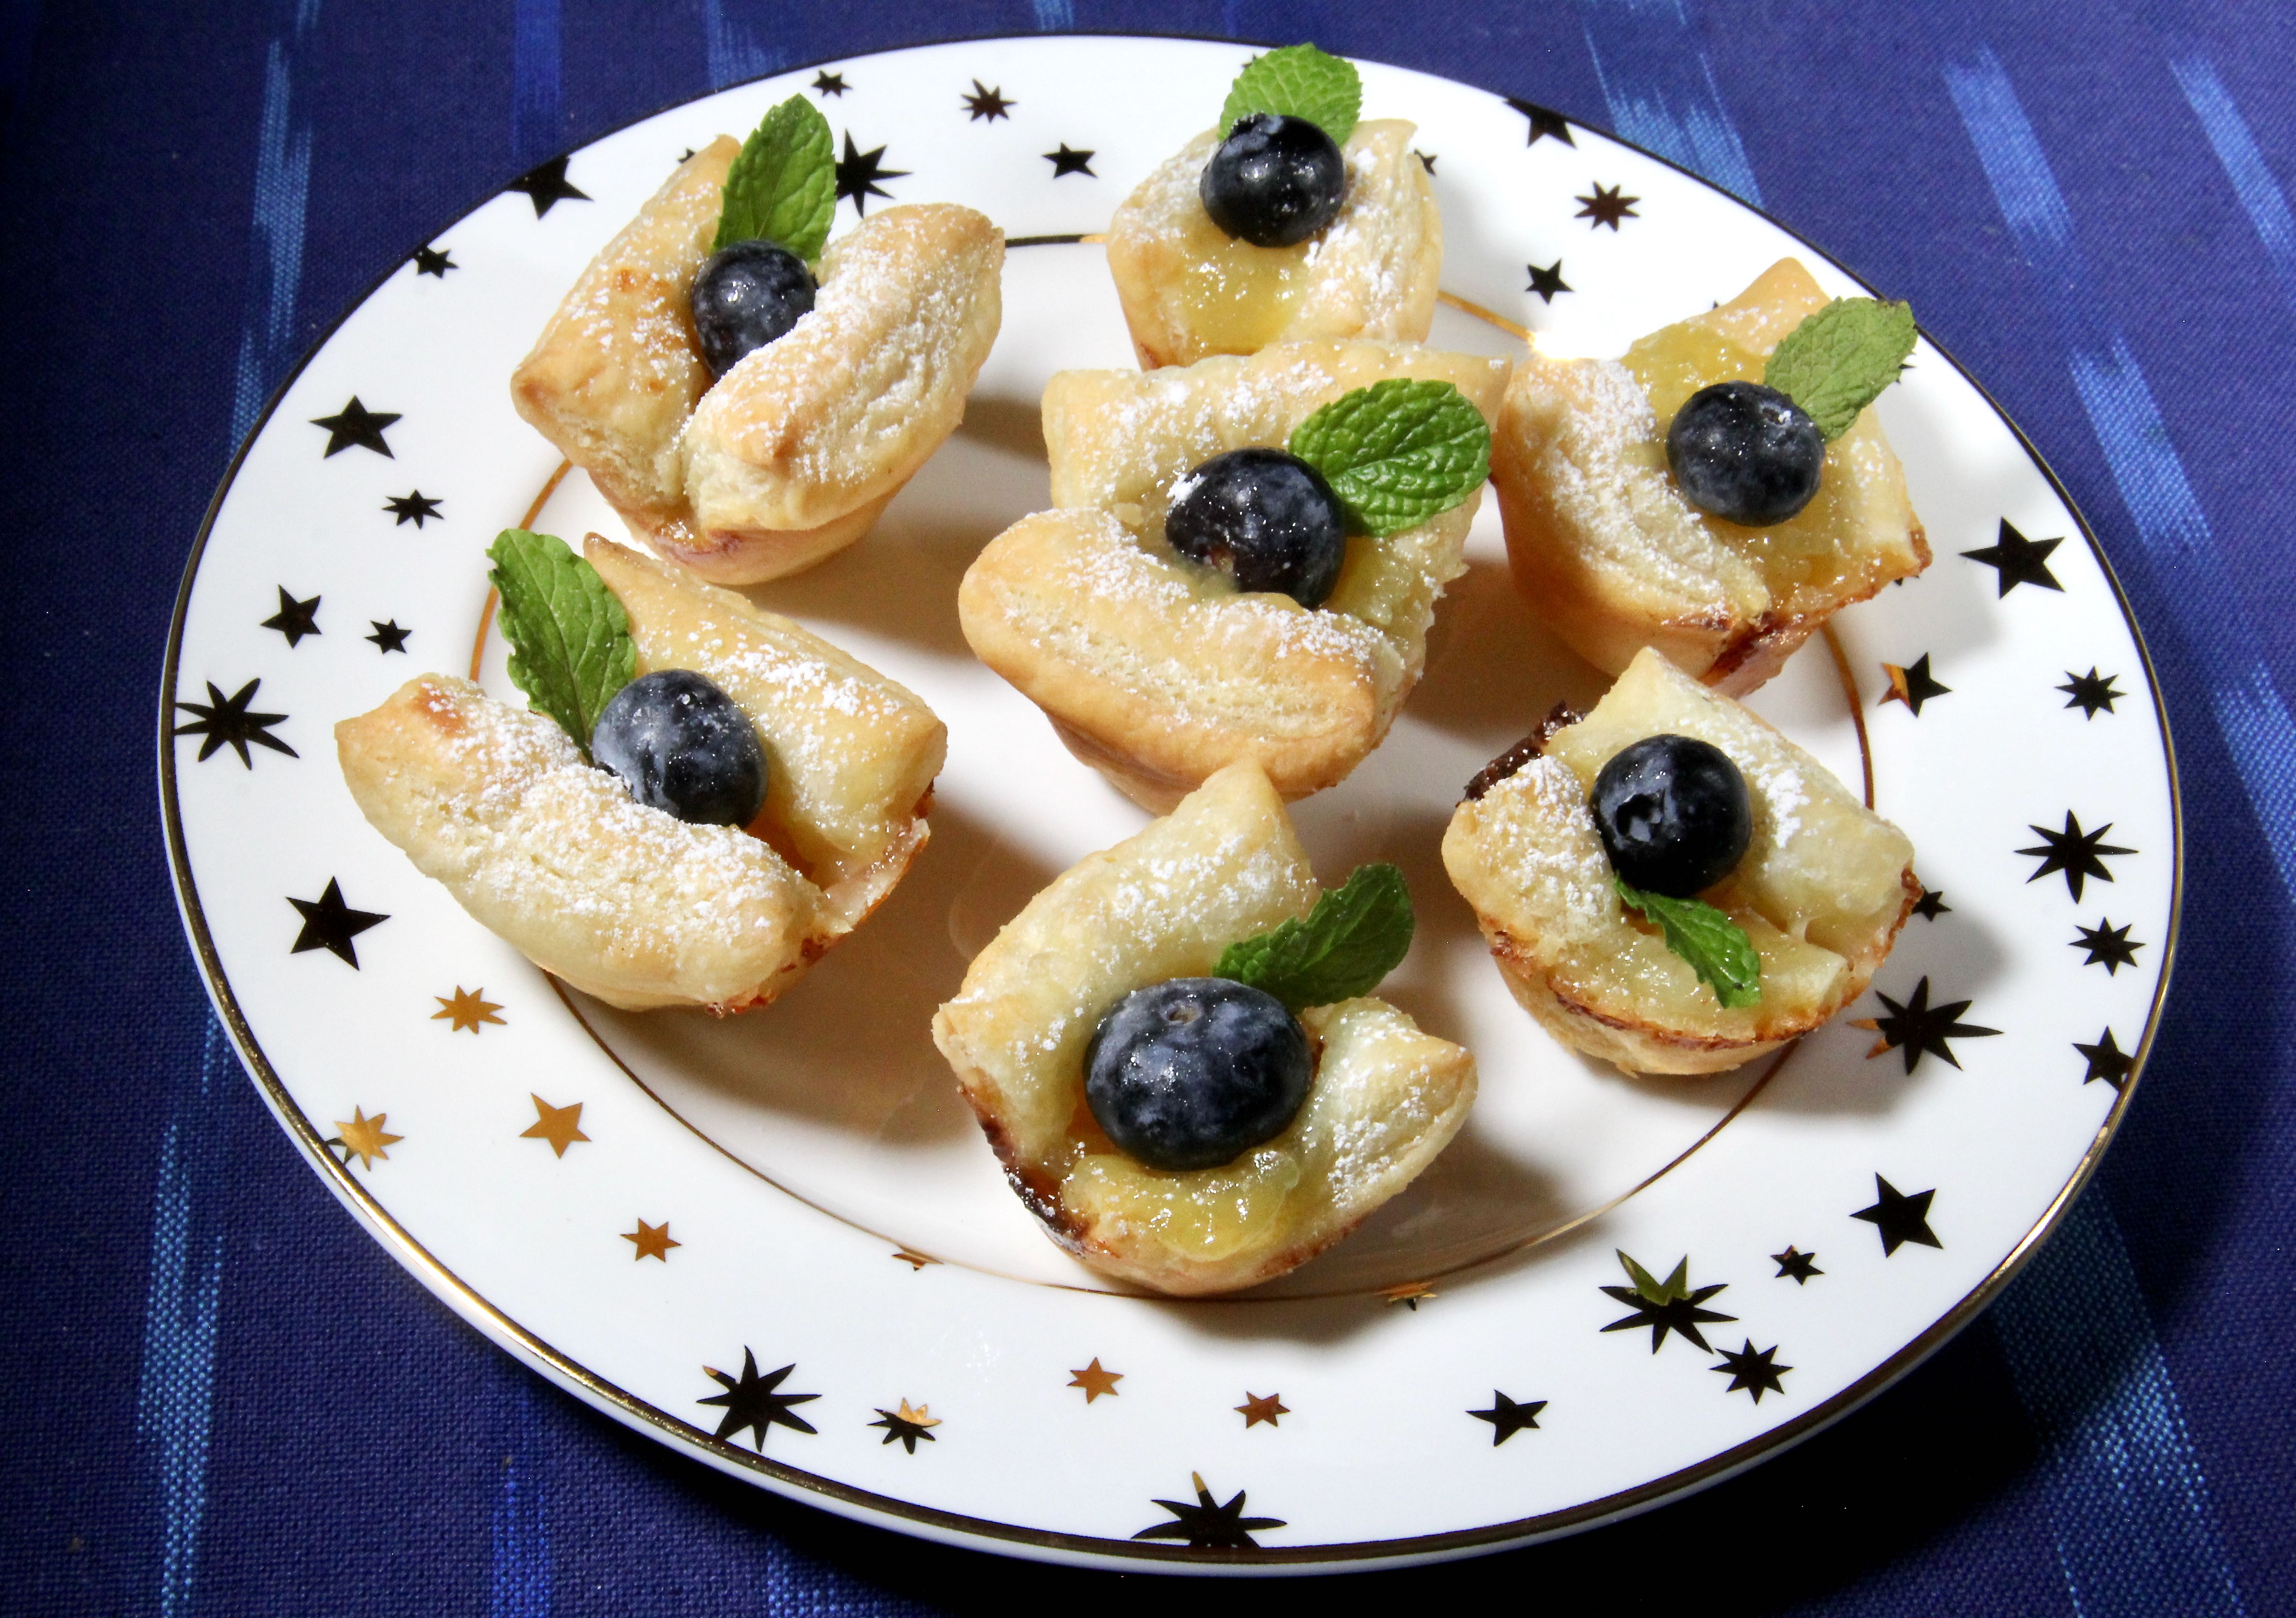 Brie, Lemon Curd, and Blueberry Bites